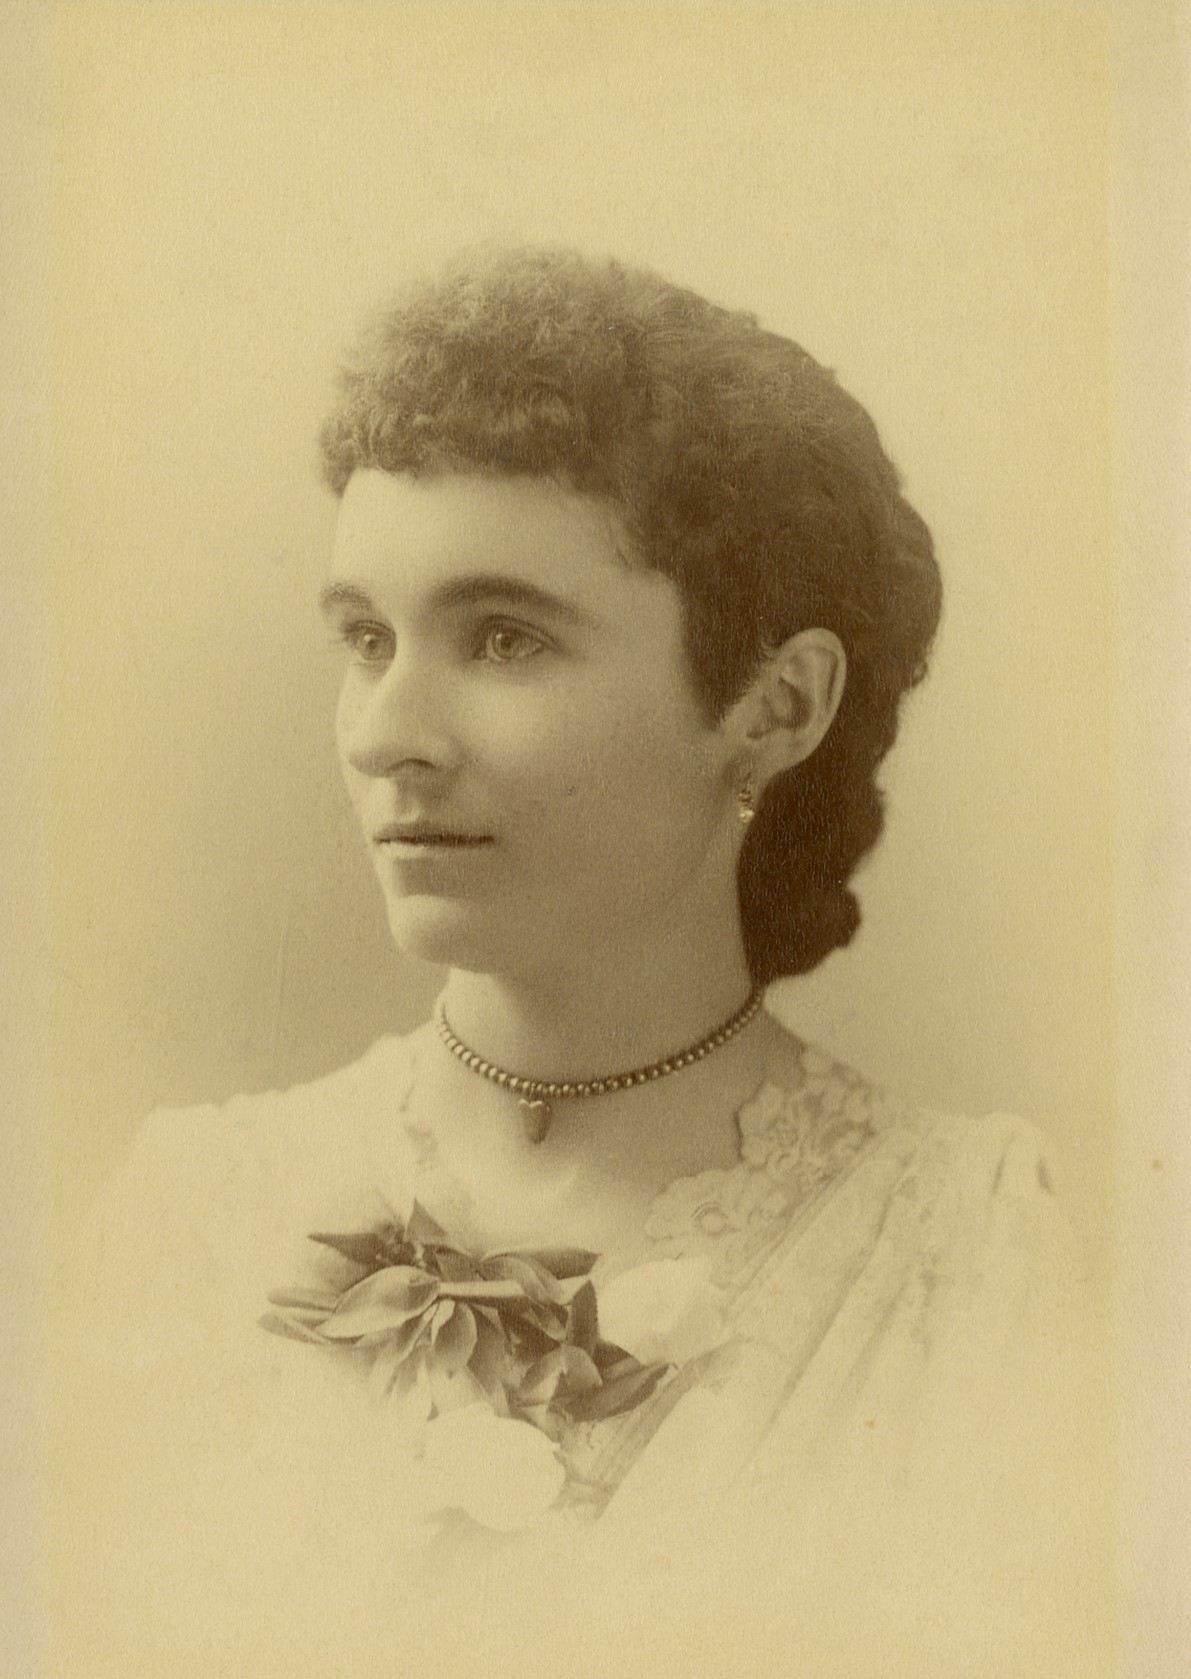 Photo portrait of a young woman, a three-quarters view of her face and shoulder, she is looking off to the left. She is wearing a white lace V-neck blouse with a flower corsage pinned in front. She has short dark hair that looks thick and wavy, with very short bangs across her forehead. She wears small earrings of a dangling pearl, and a beaded choker necklace that has a heart-shaped pendant.